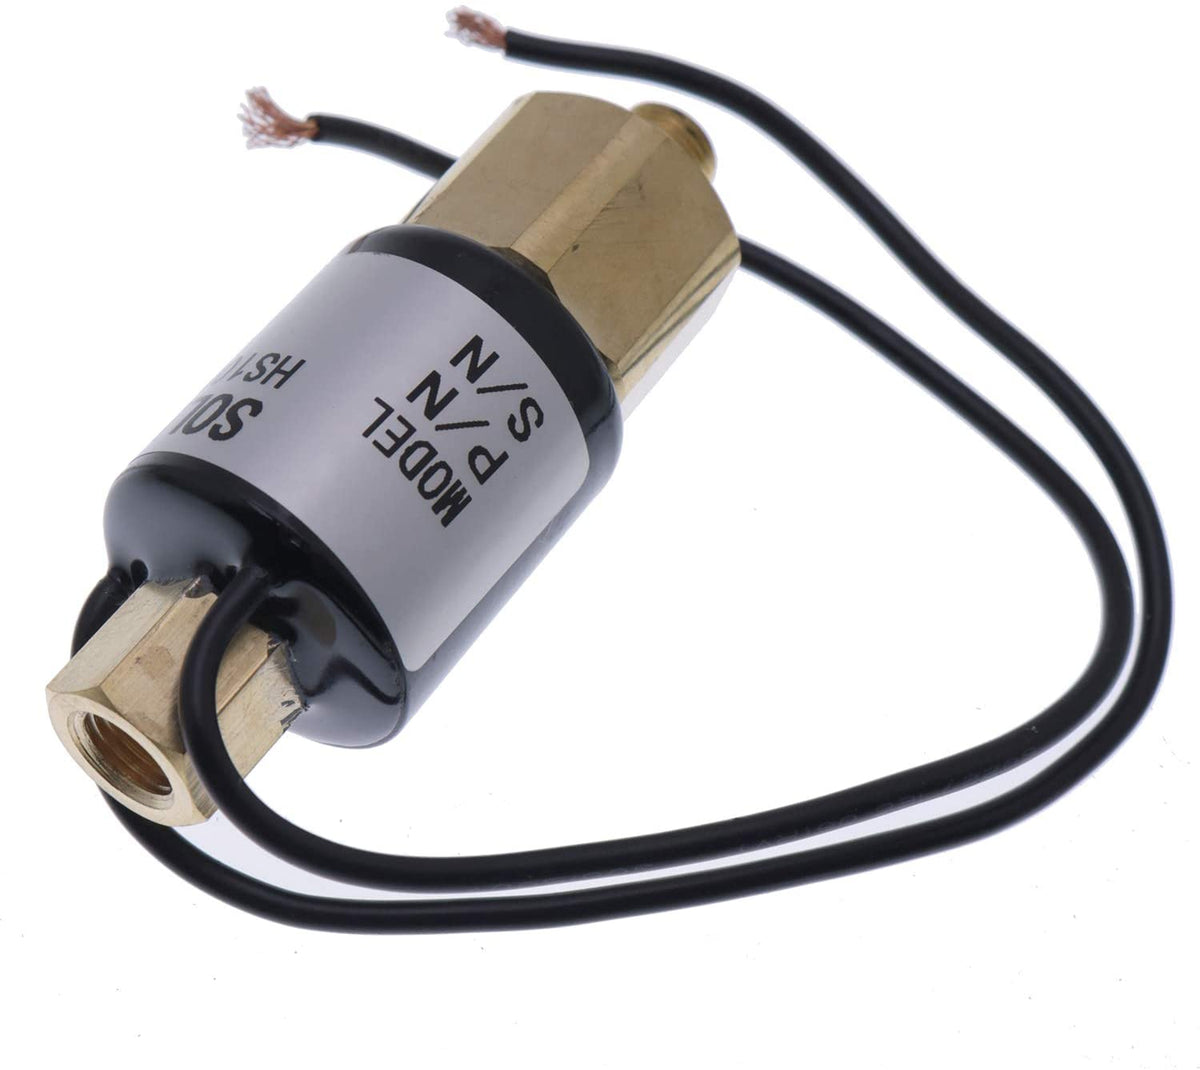 Solenoid Valve T4748800 4748800 for Titan Brake Actuators with Reverse Lockouts - KUDUPARTS